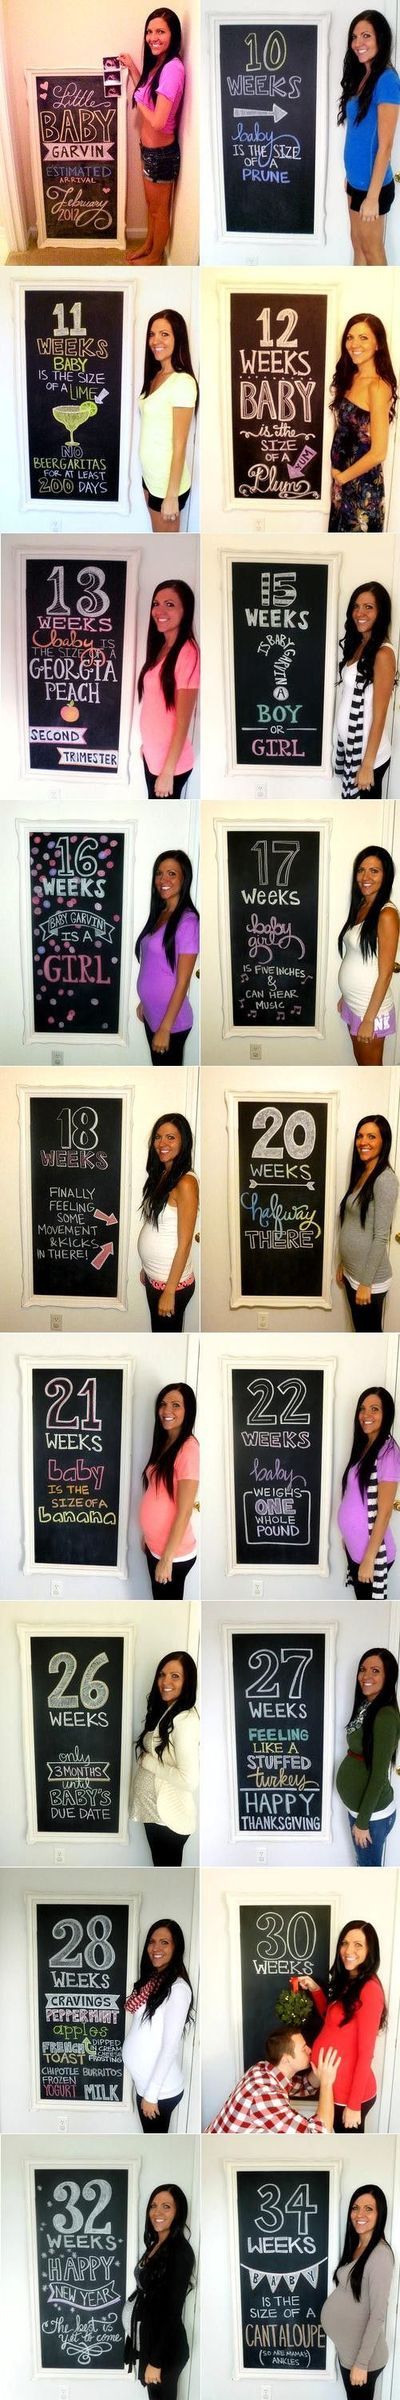 When I get pregnant. . . Years from now. . .Maternity timeline using a chalkboar